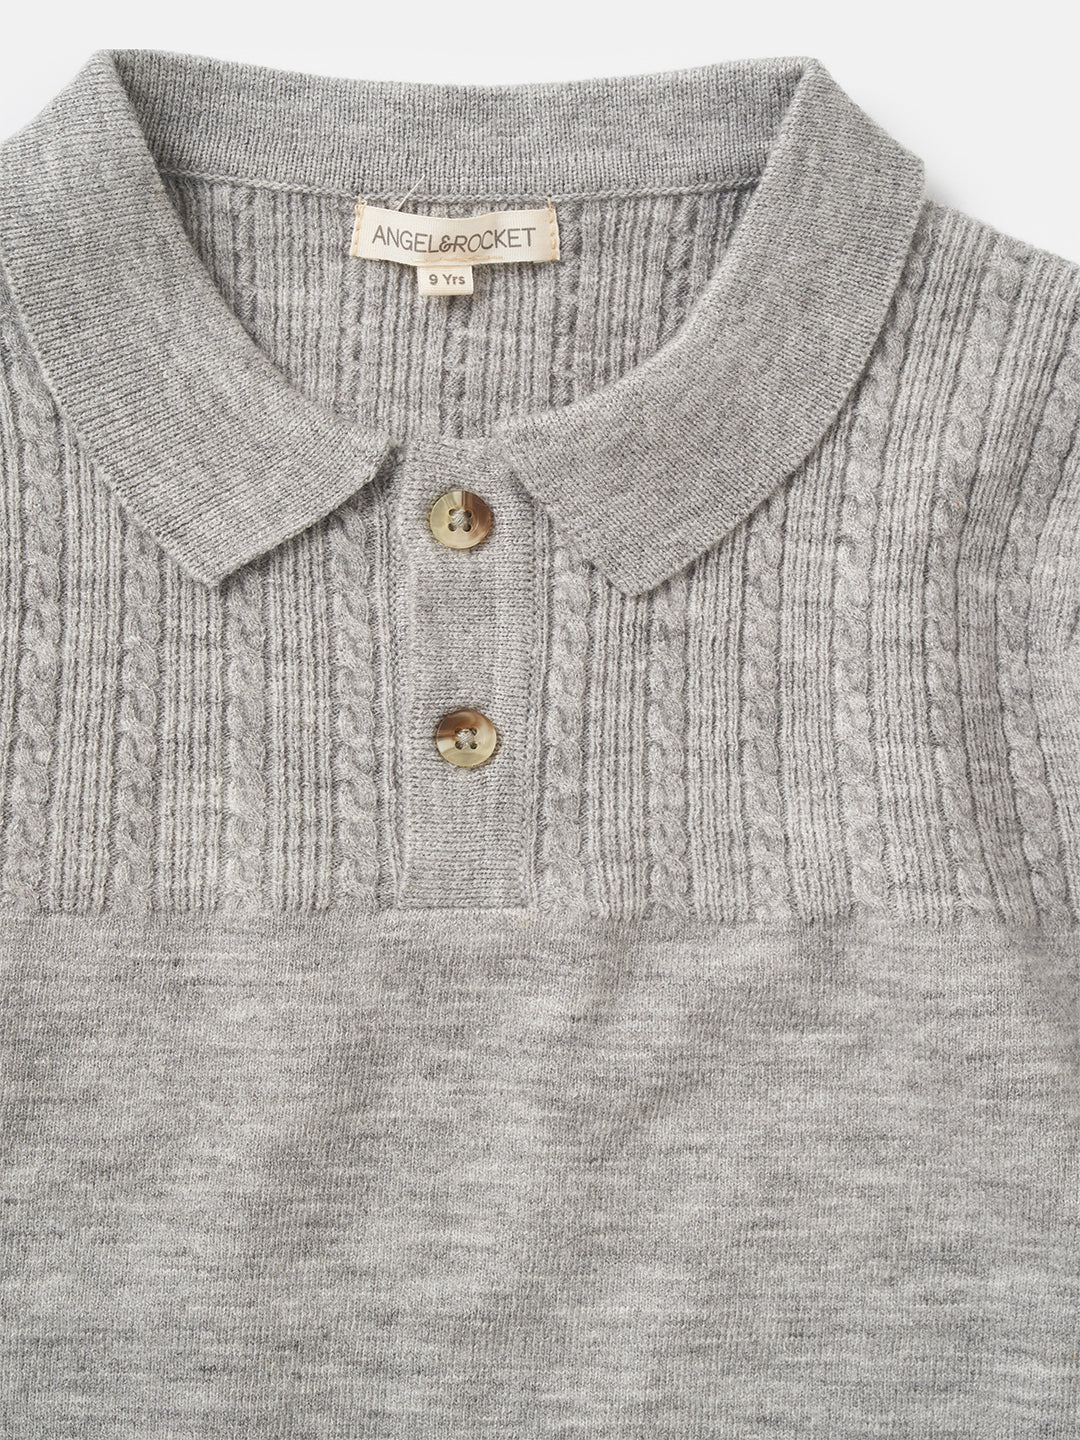 Boys Self Textured Half Cable Knitted Polo Grey Sweater